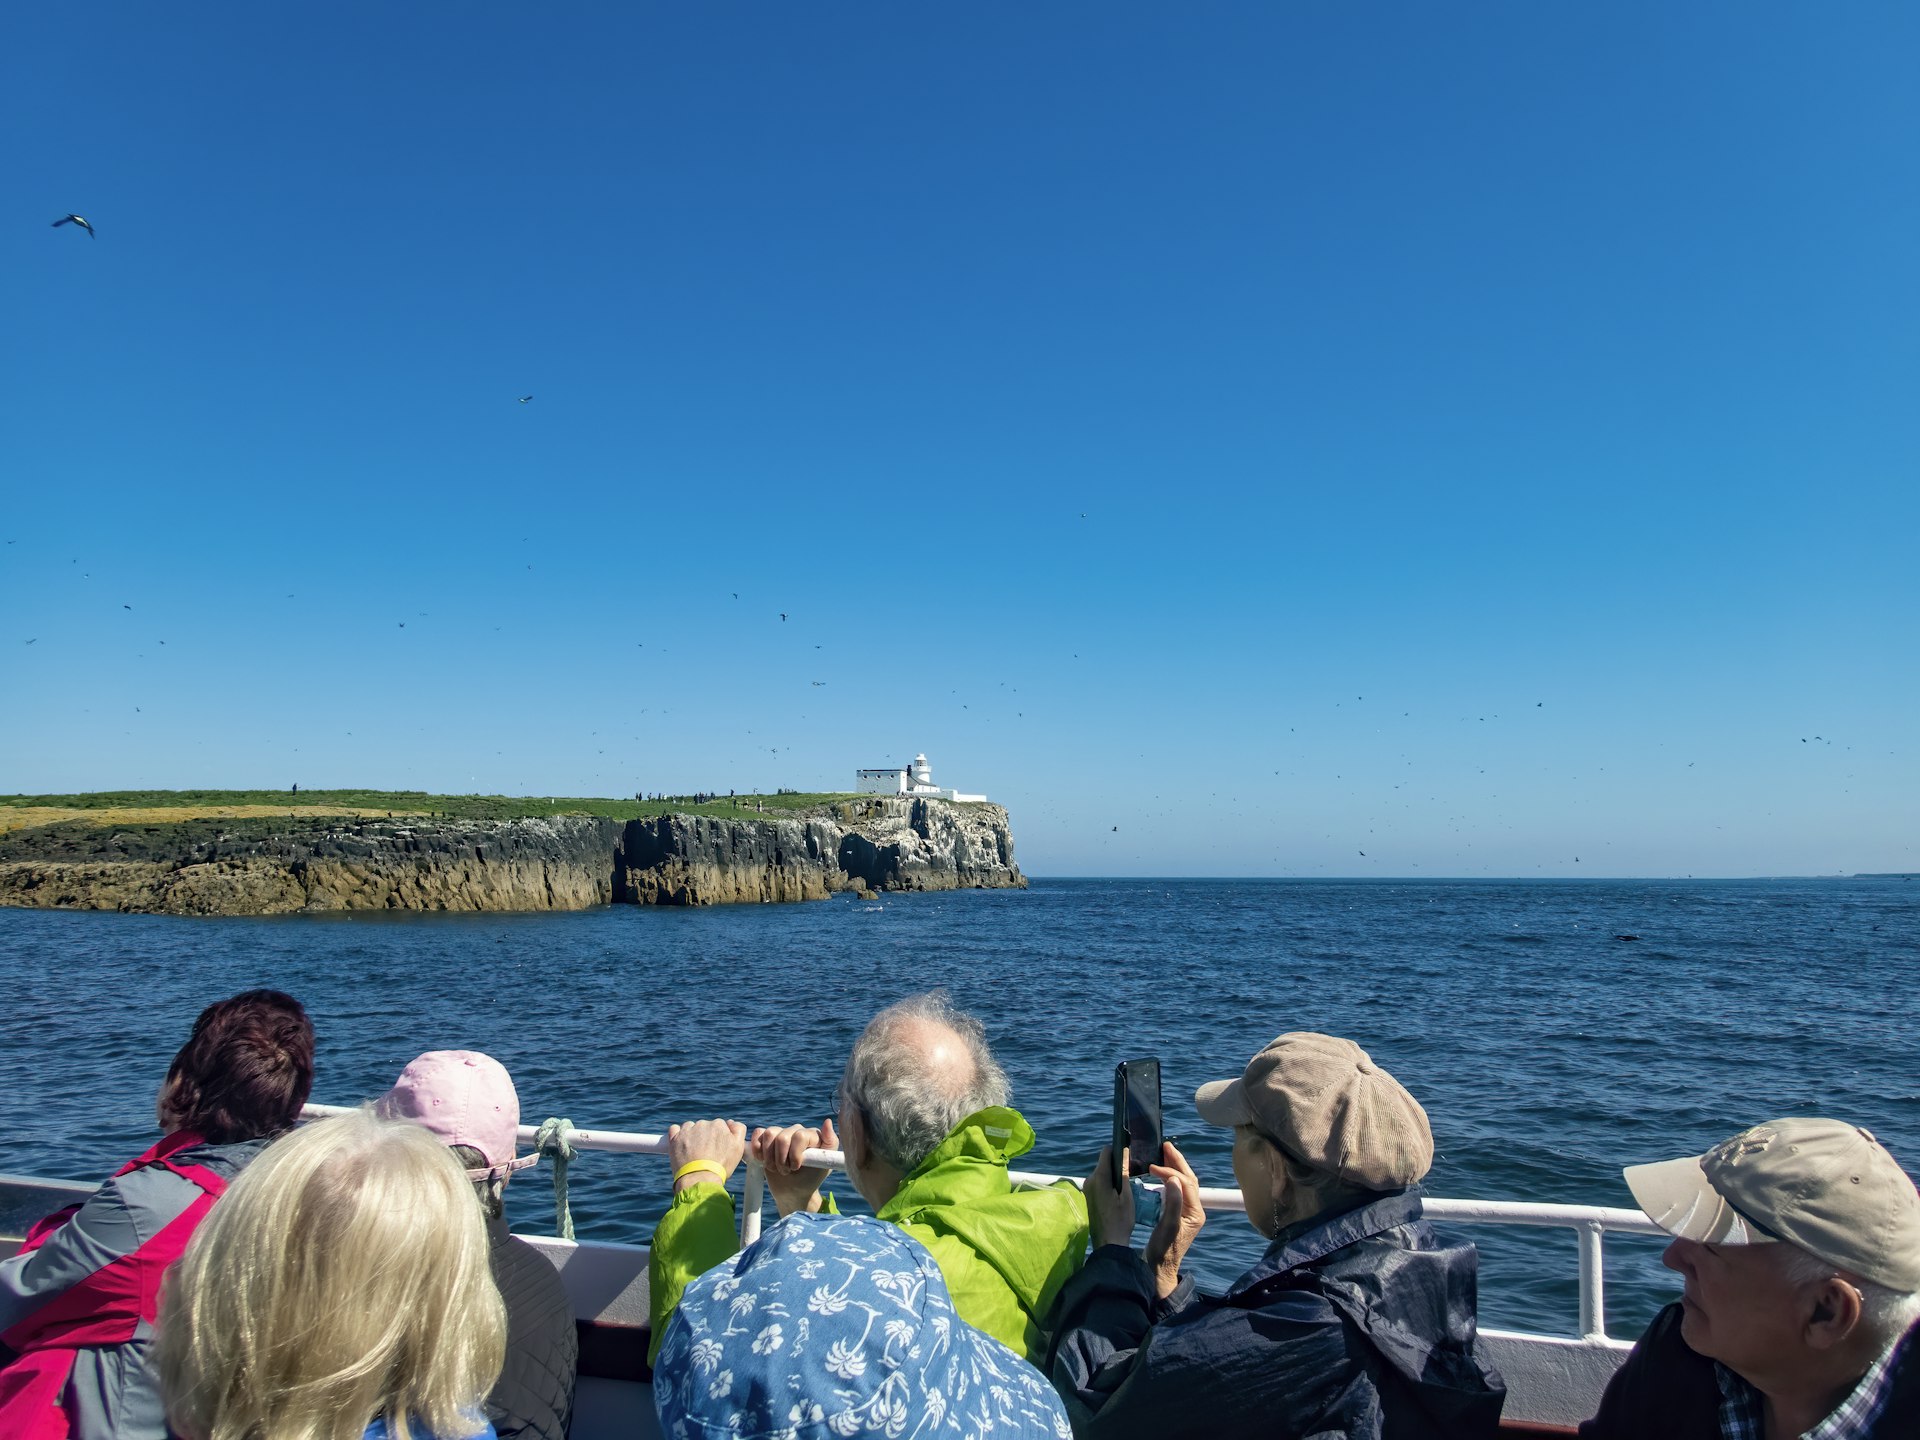 Families and tourists riding the ferry to the Farne Islands from Seahouses harbor, on the Northumberland Coast in northeast England, on a bright. sunny summer's day